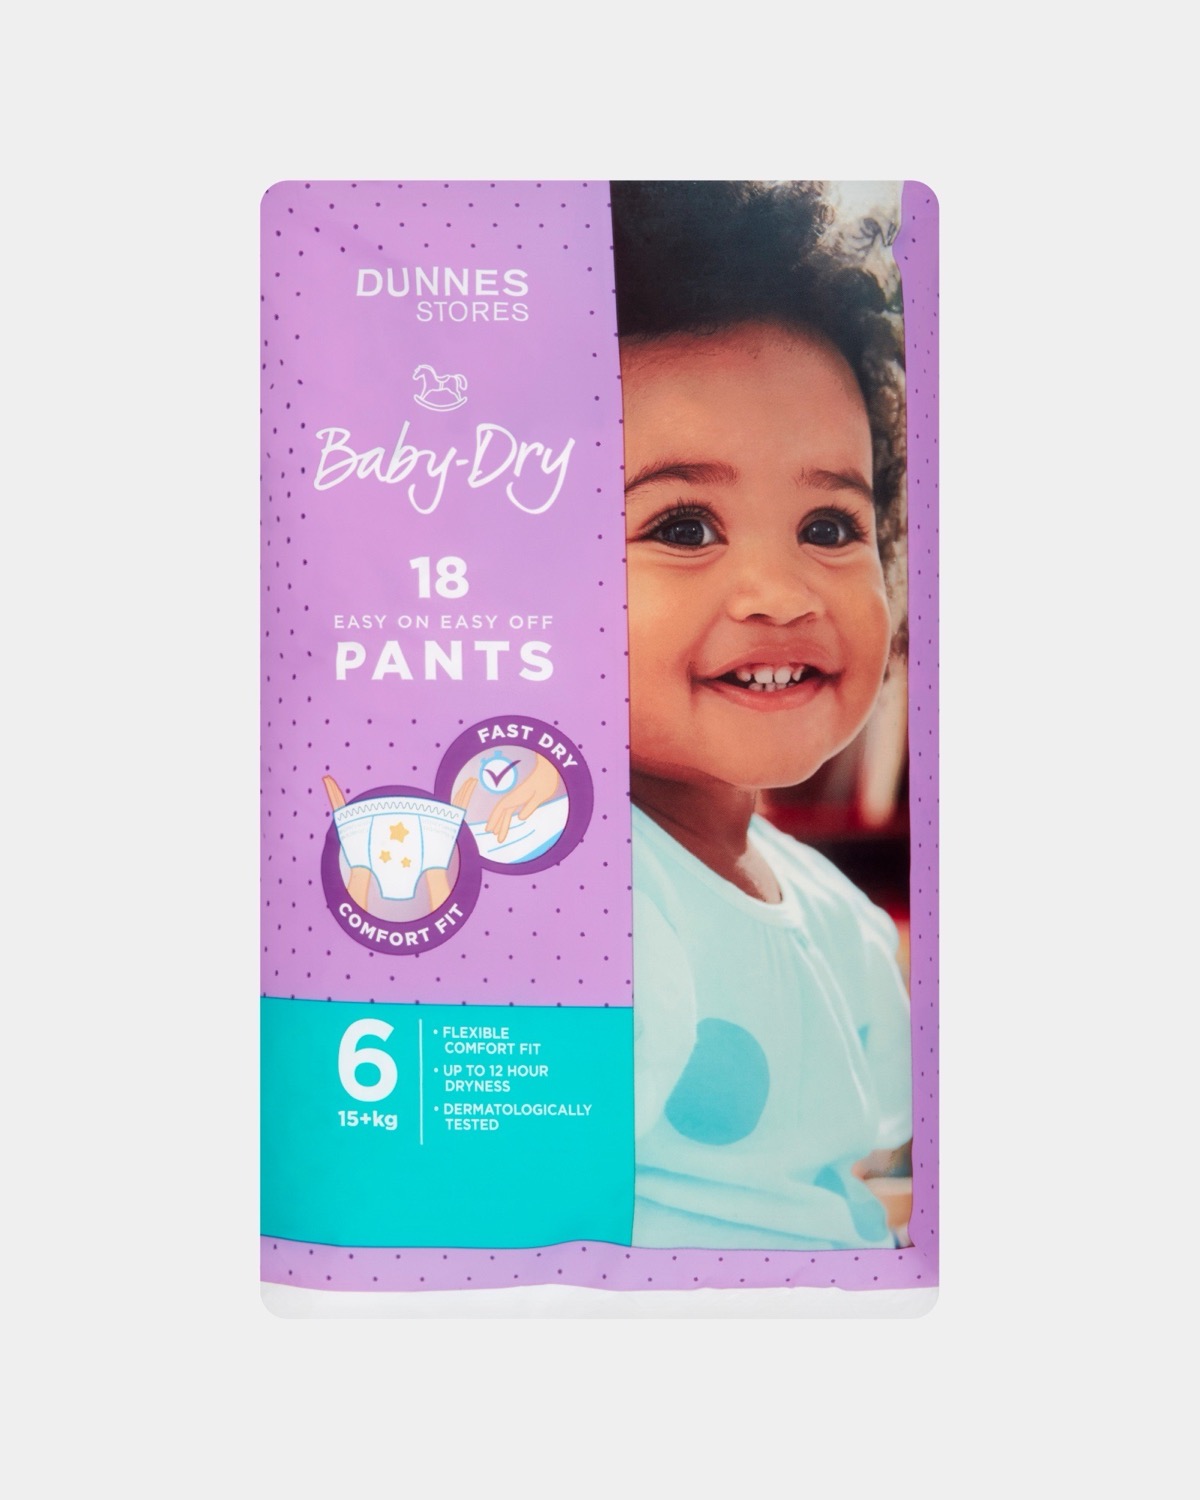 Dunnes Stores  White Waterwipes Bio Baby - 12 Packs x 60 Wipes